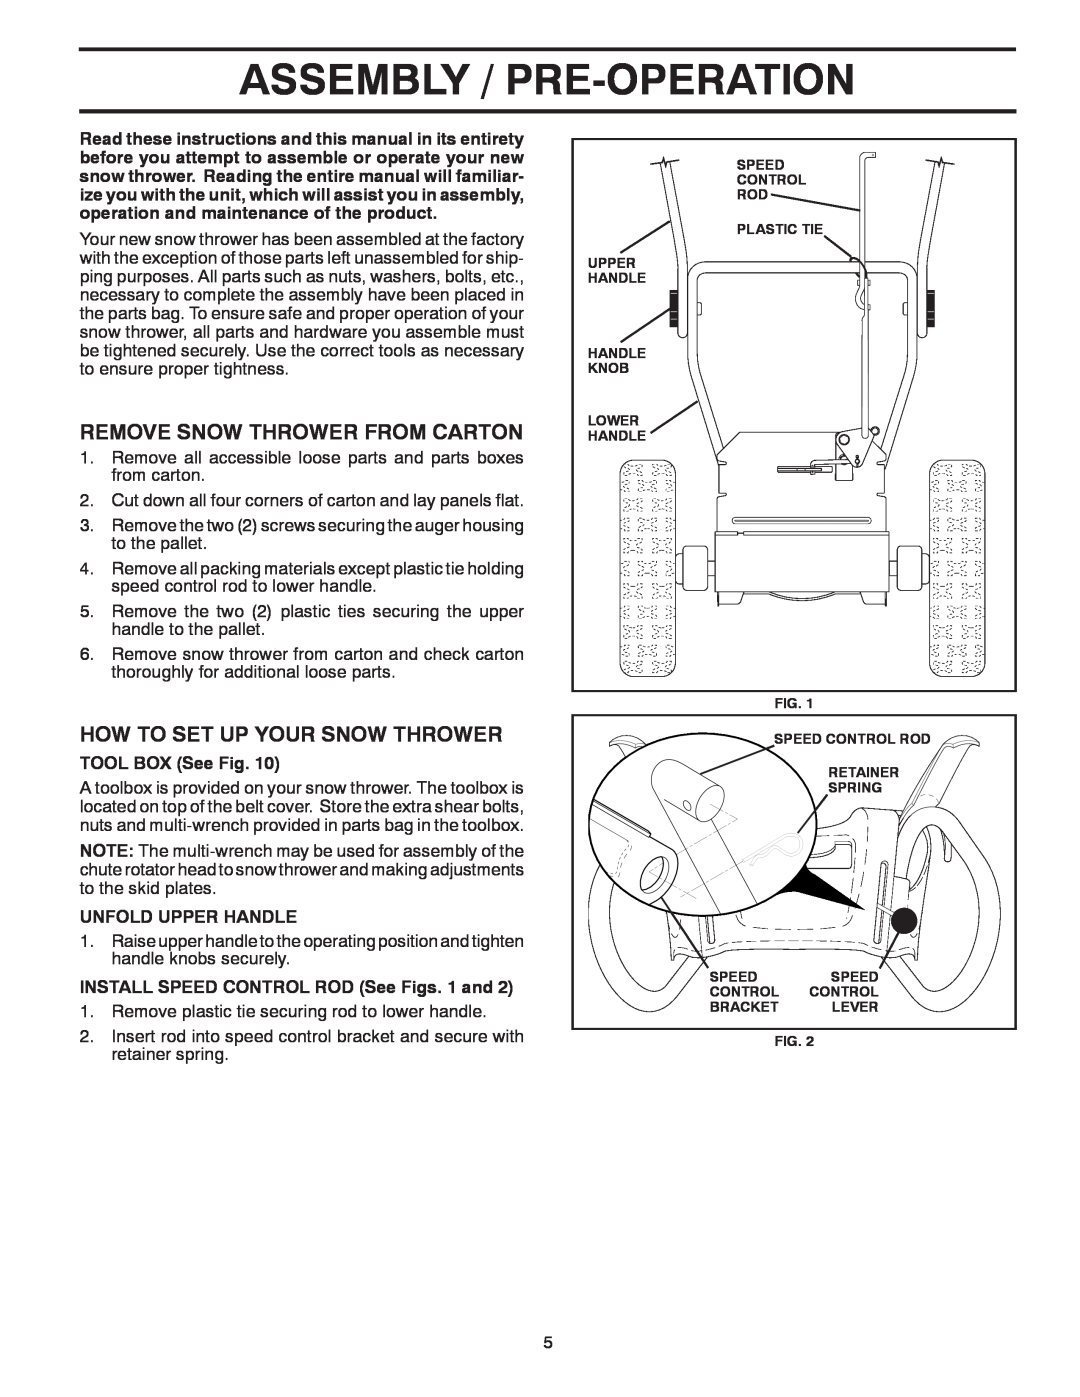 Poulan PP11530ES owner manual Assembly / Pre-Operation, Remove Snow Thrower From Carton, How To Set Up Your Snow Thrower 